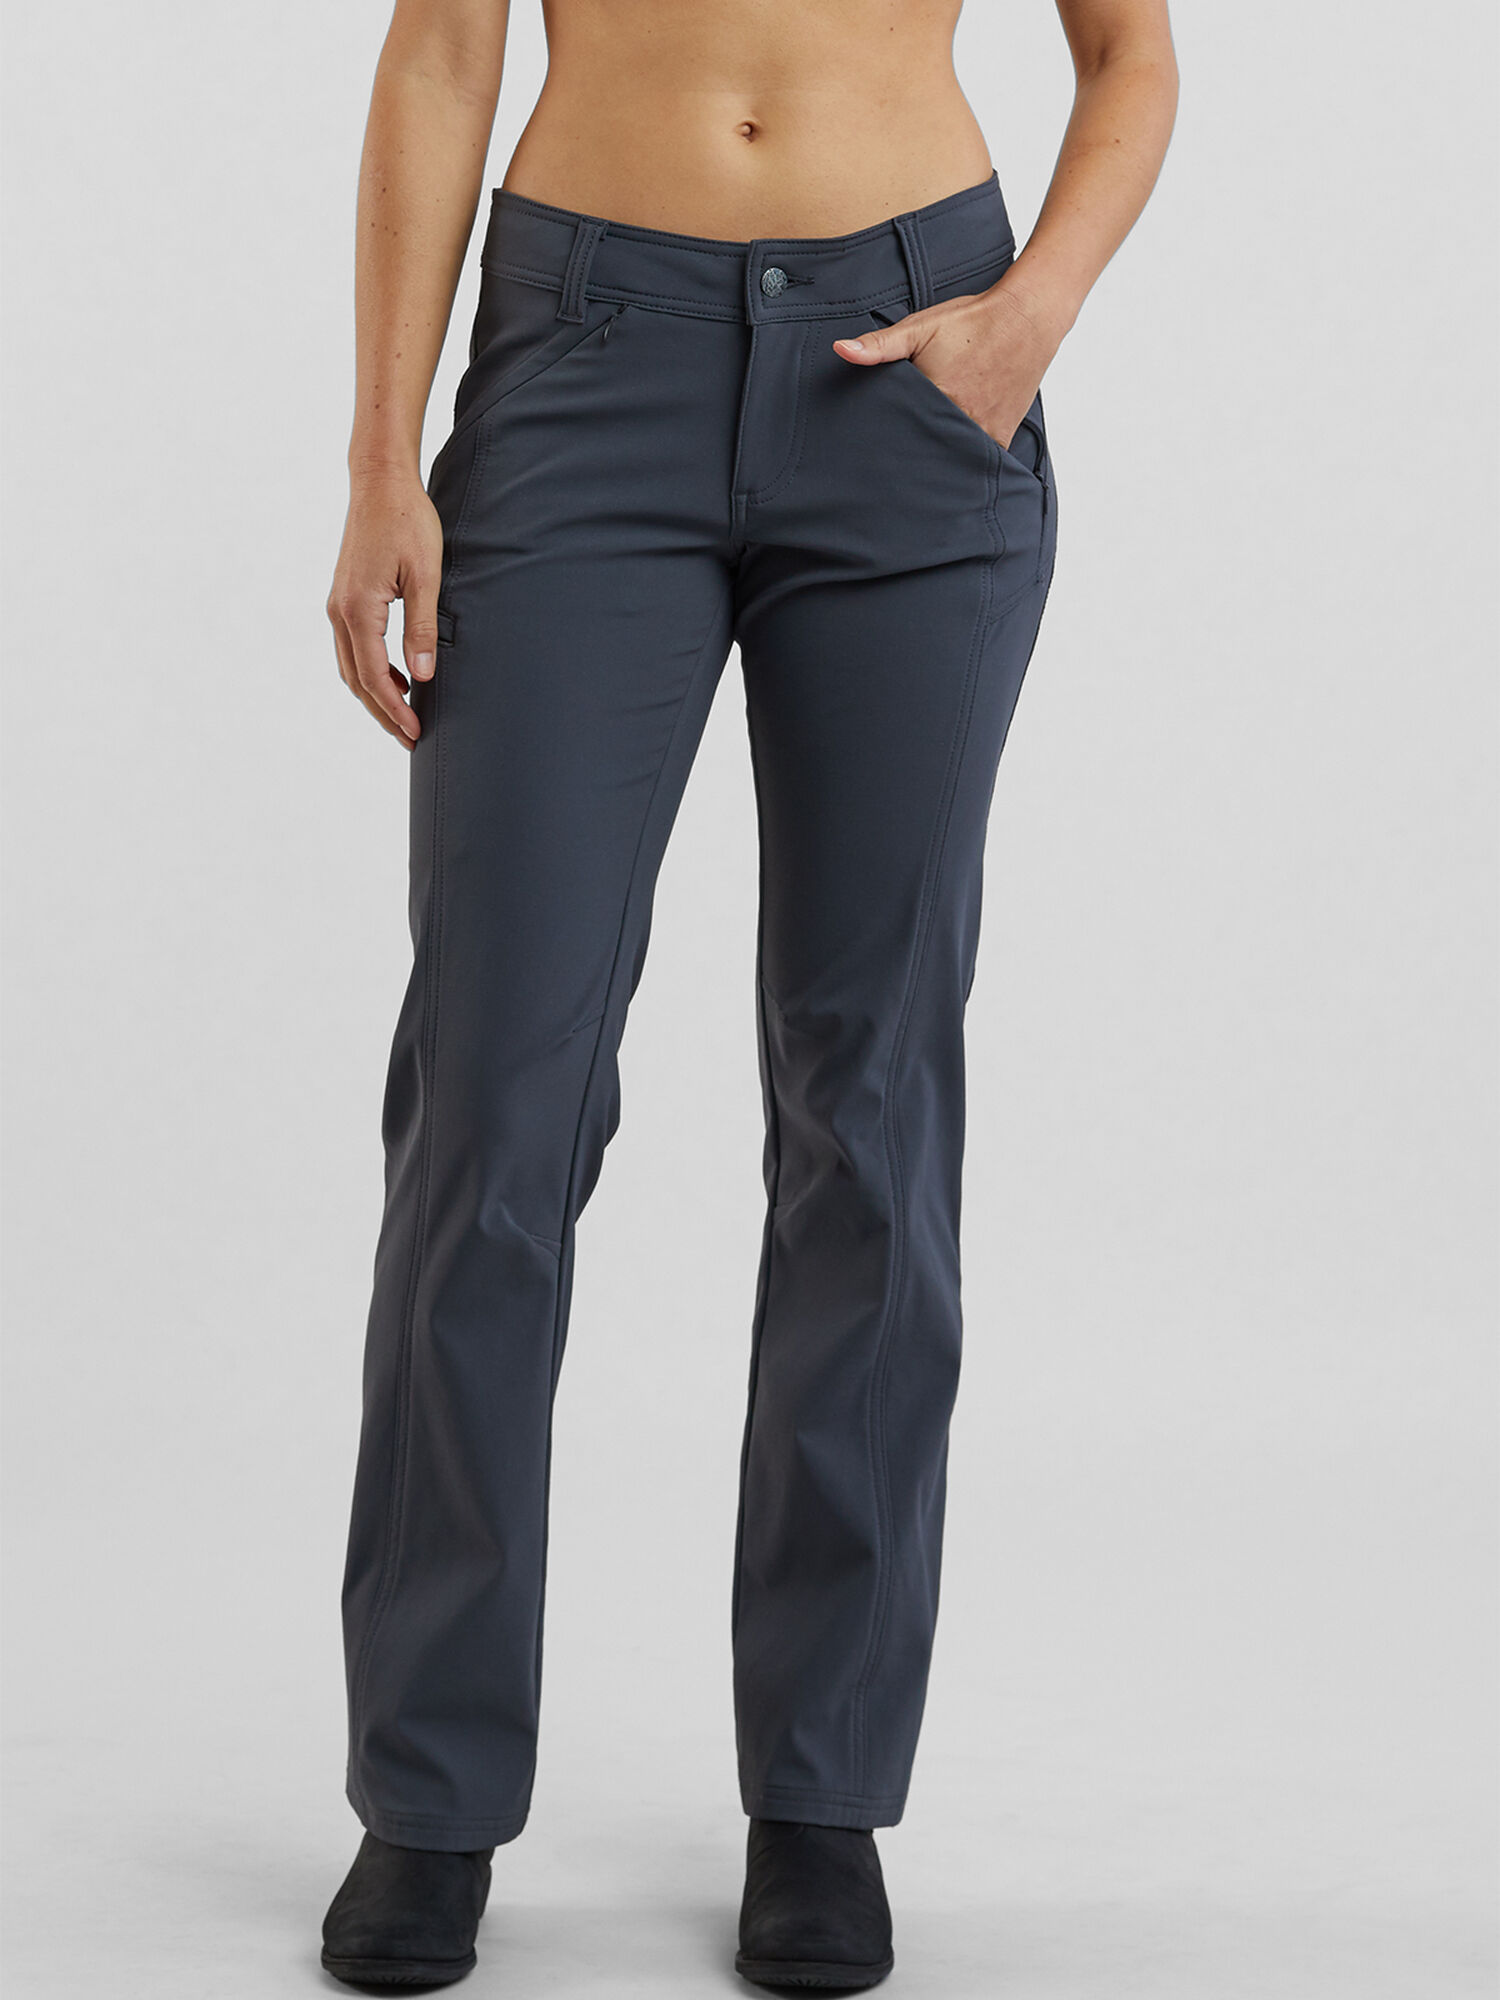 Women's Hiking Pants for Winter by Prana | Title Nine